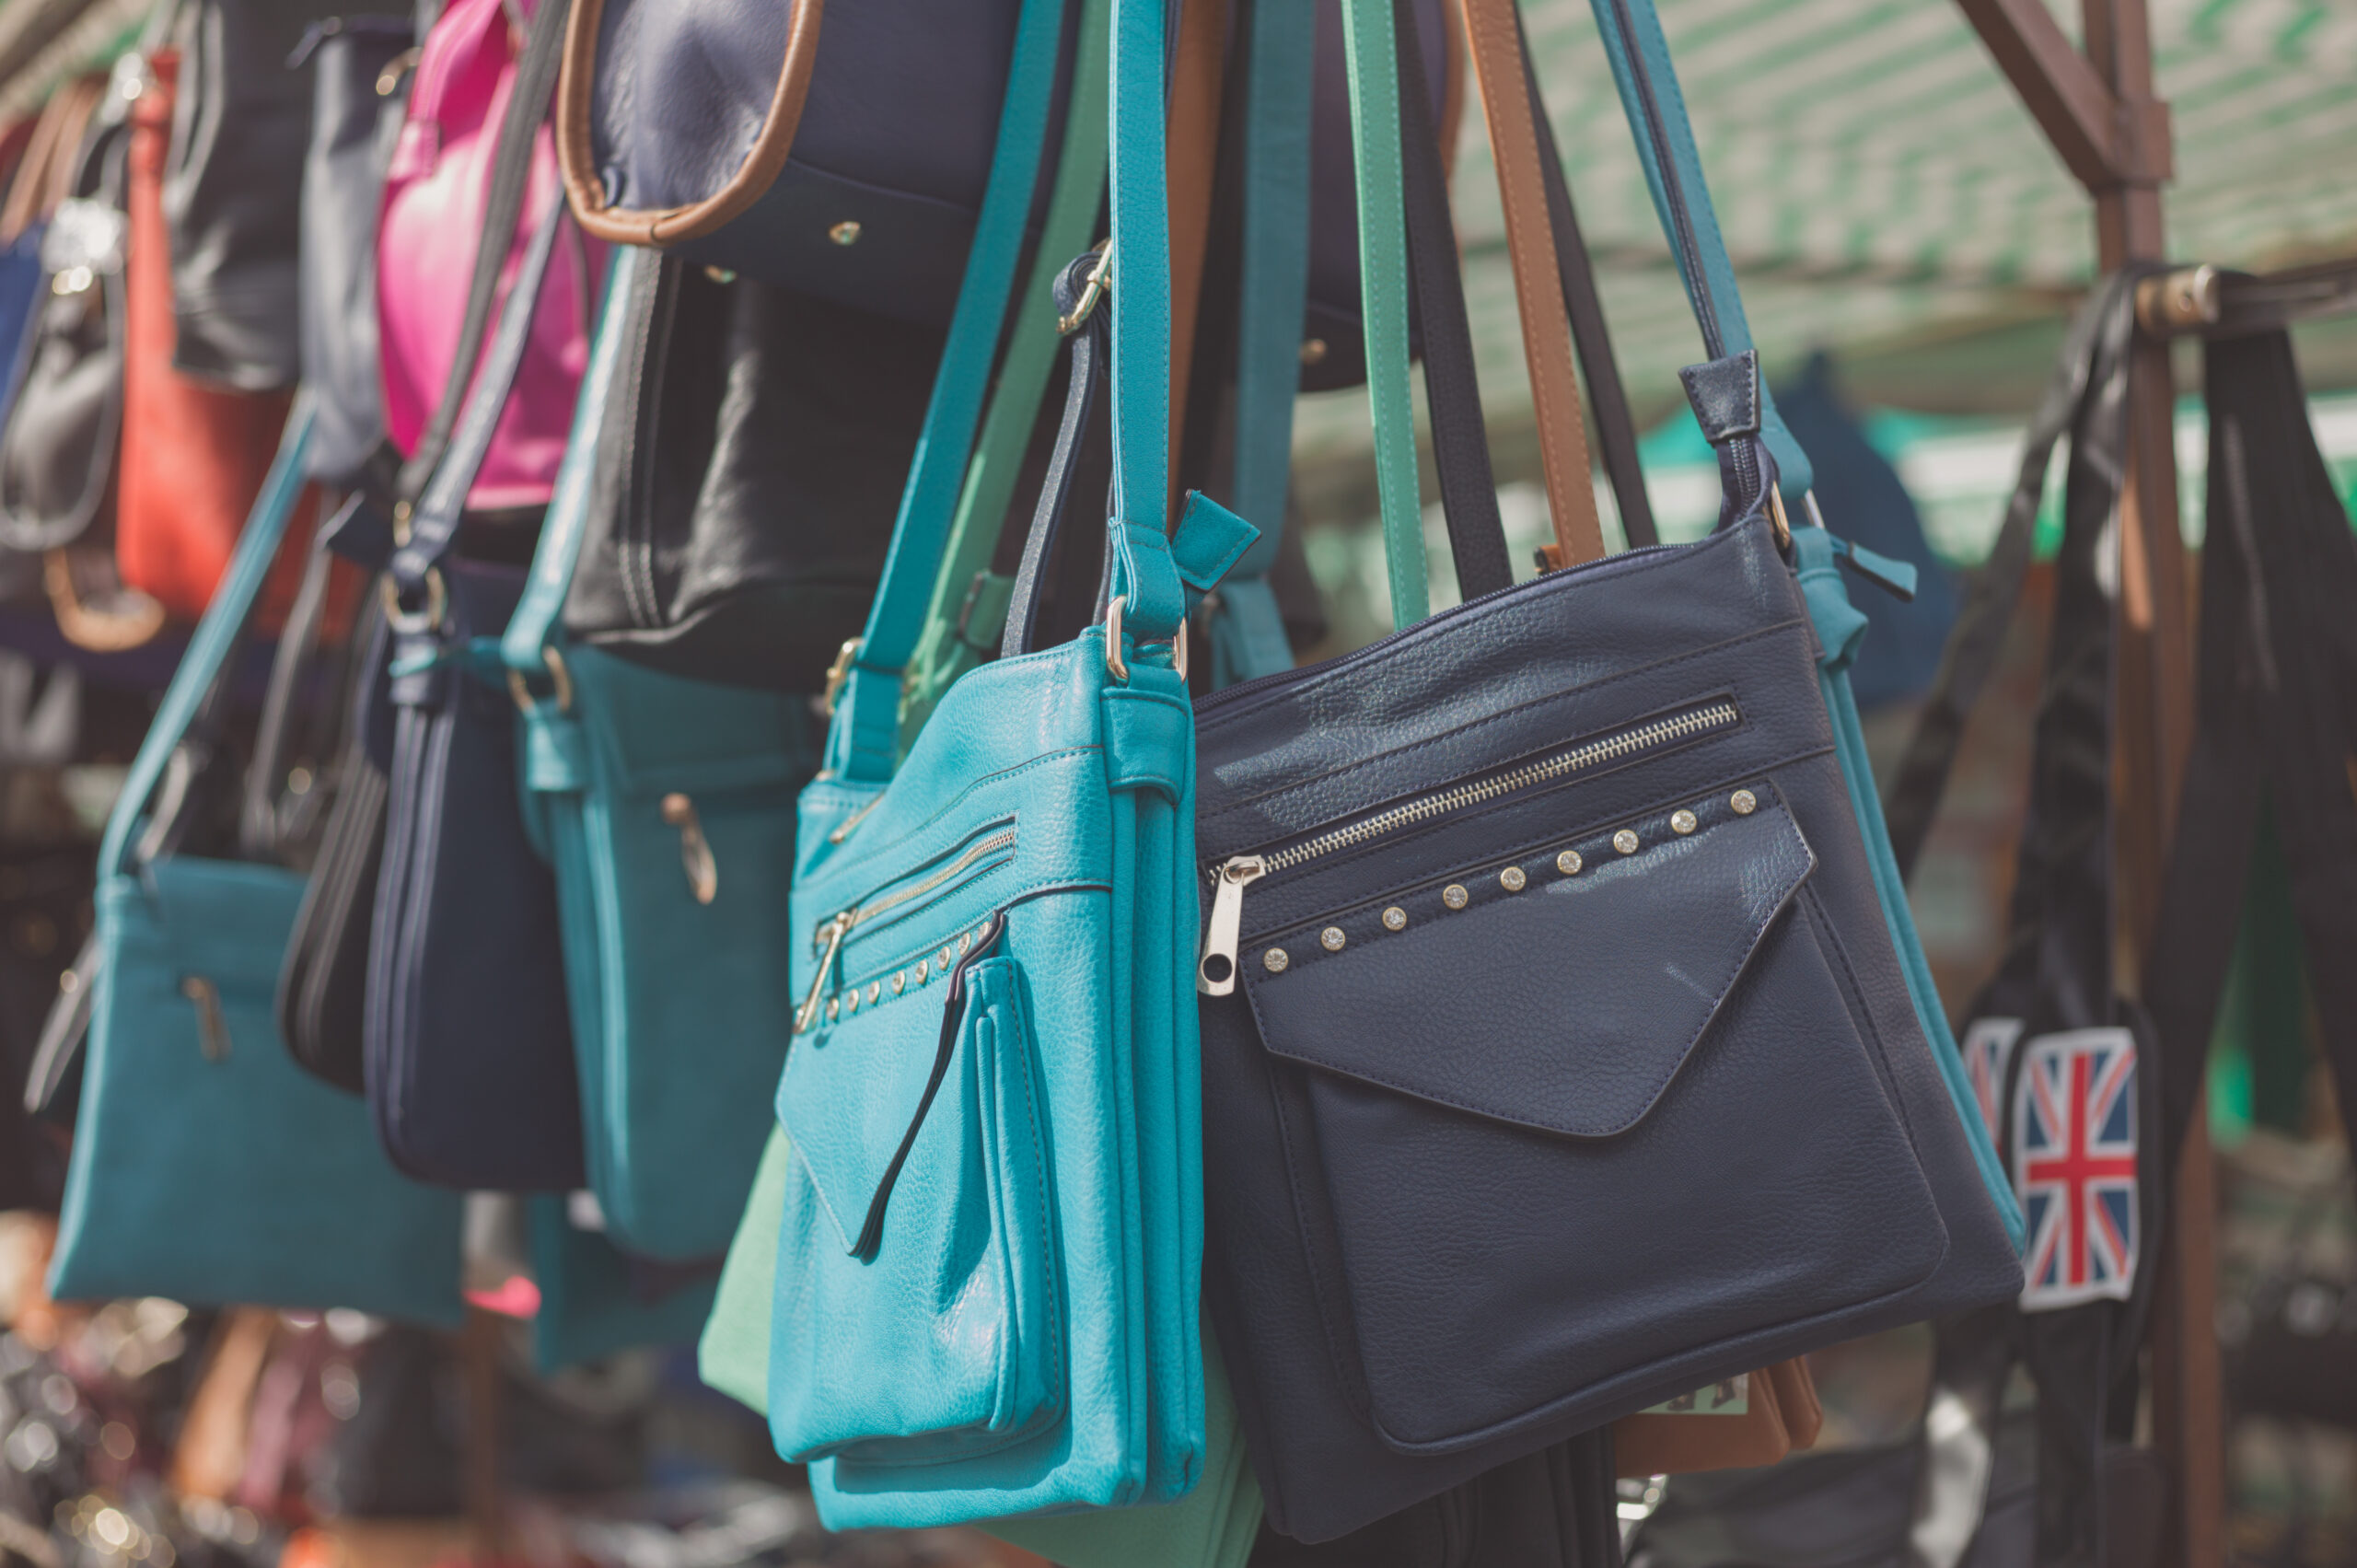 Blue and purple handbags on display in marketplace